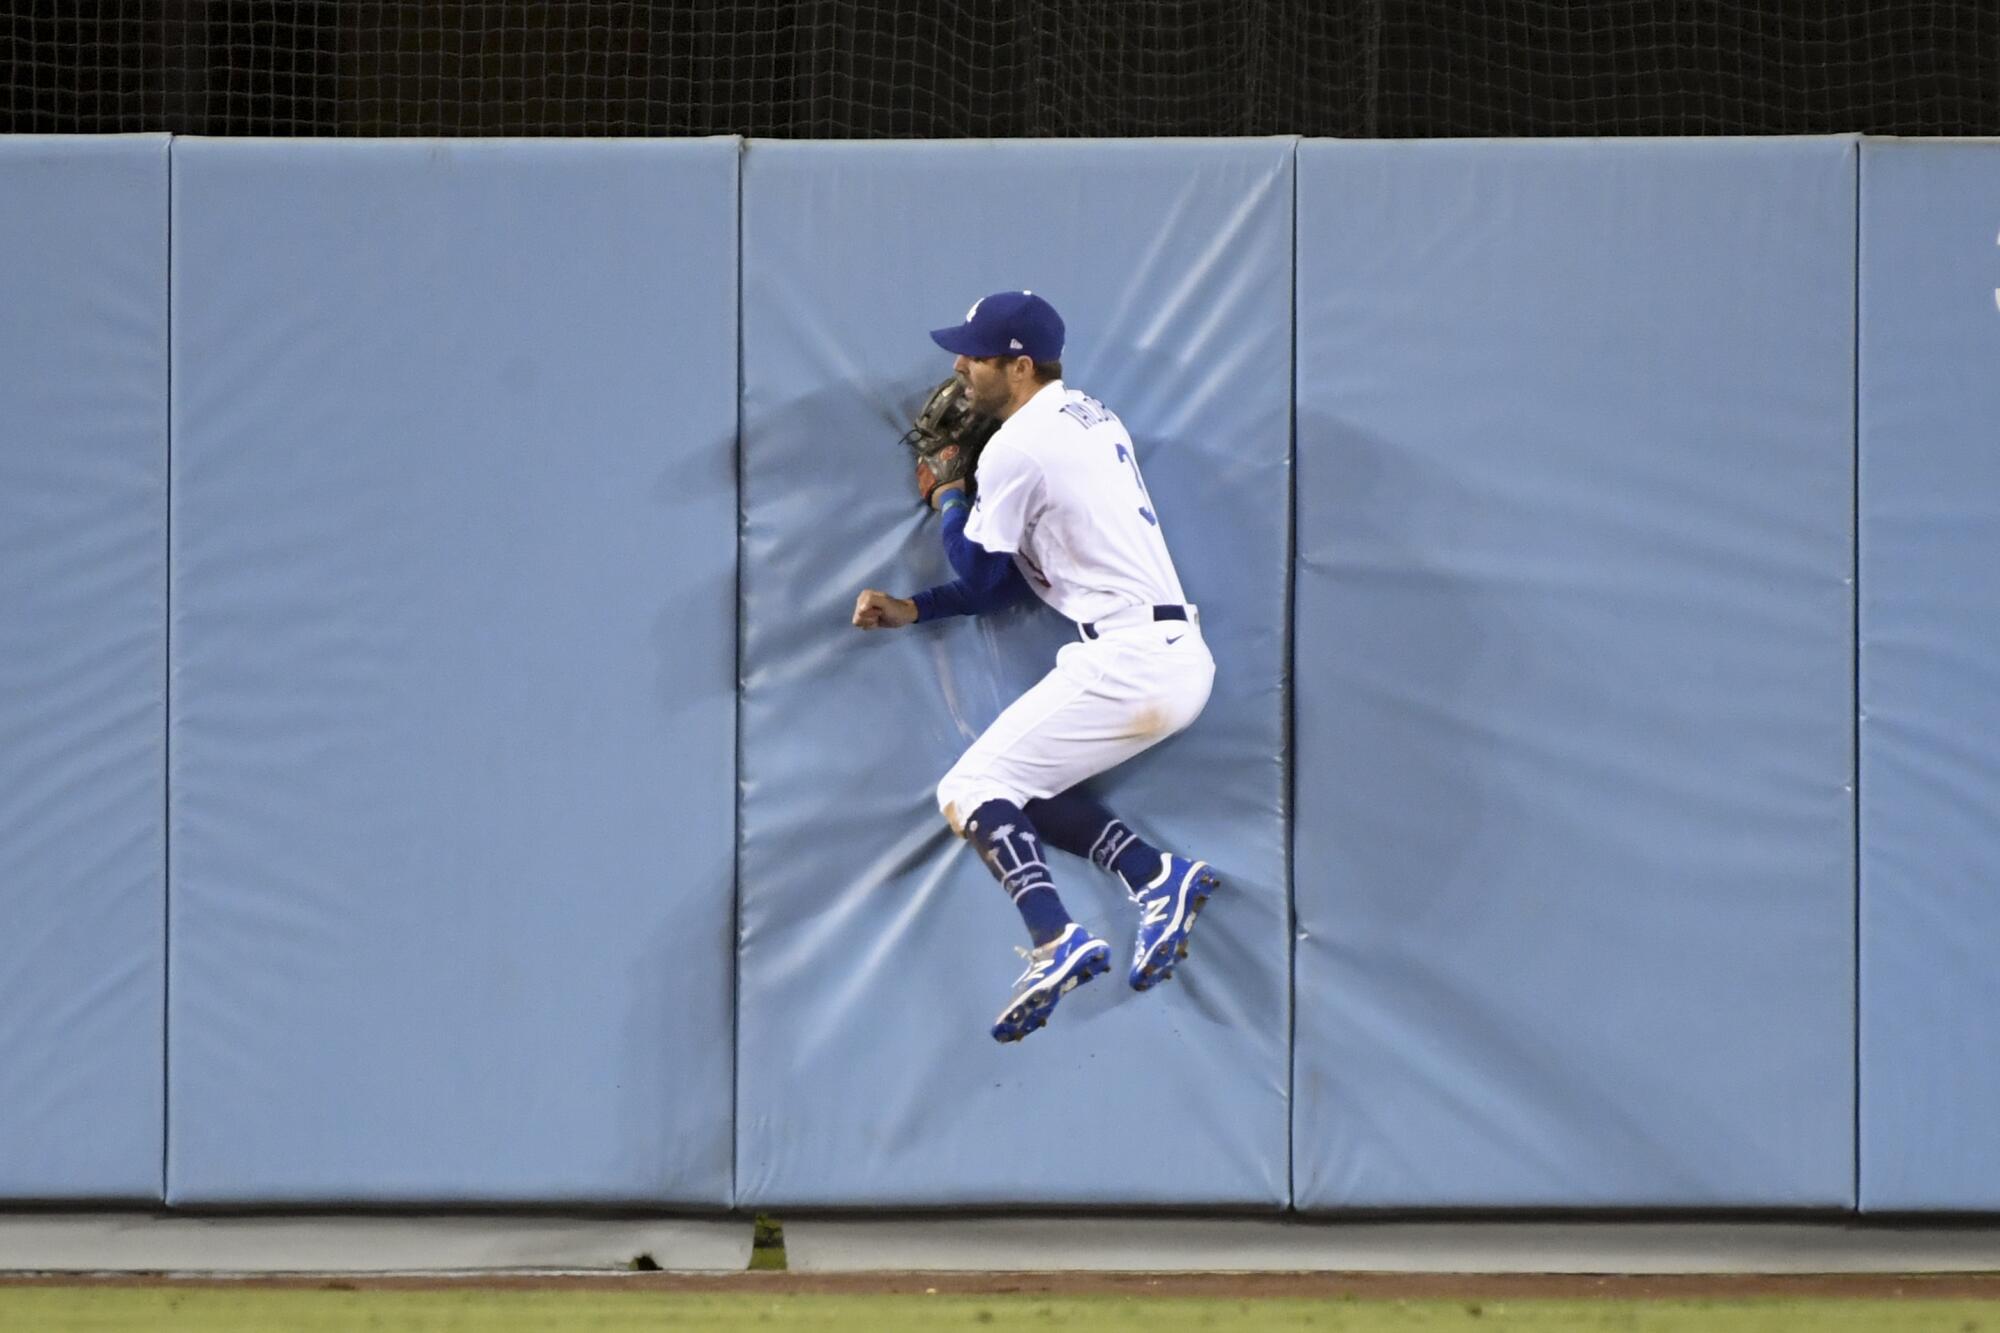  Dodgers center fielder Chris Taylor runs into the outfield wall after catching a ball.